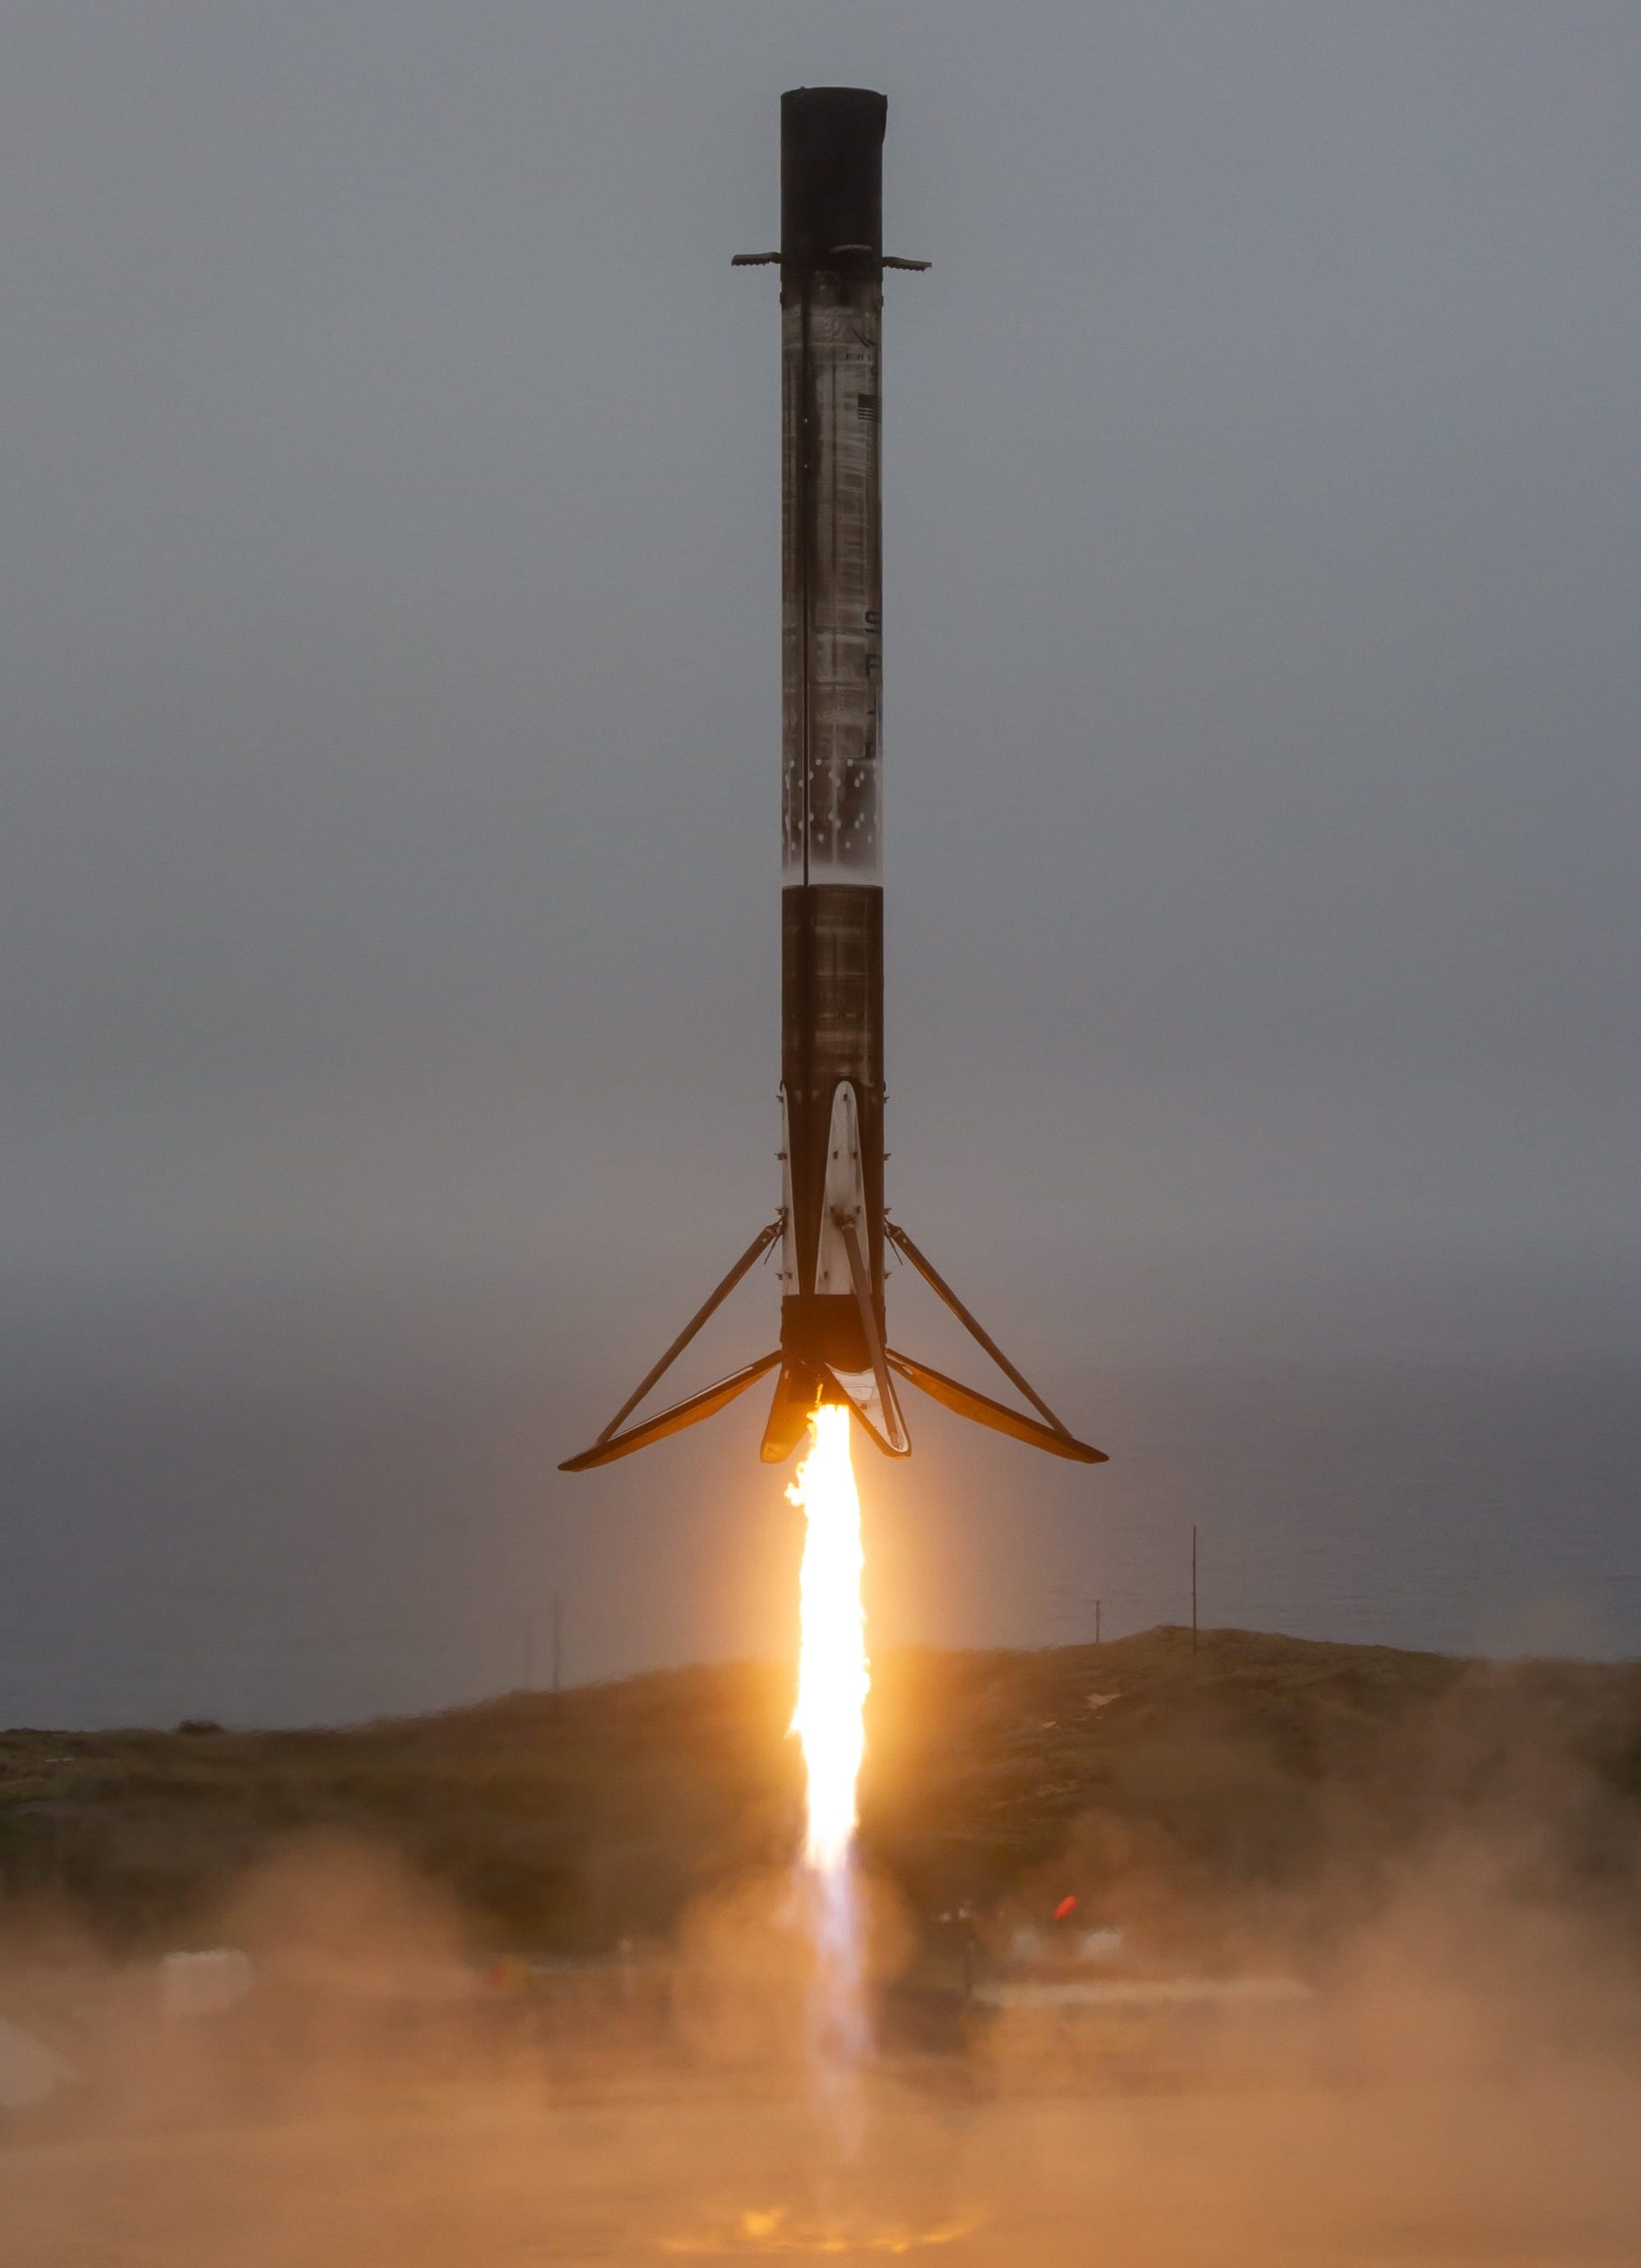 B1081 landing at Landing Zone 4 after supporting the EarthCARE launch. ©SpaceX